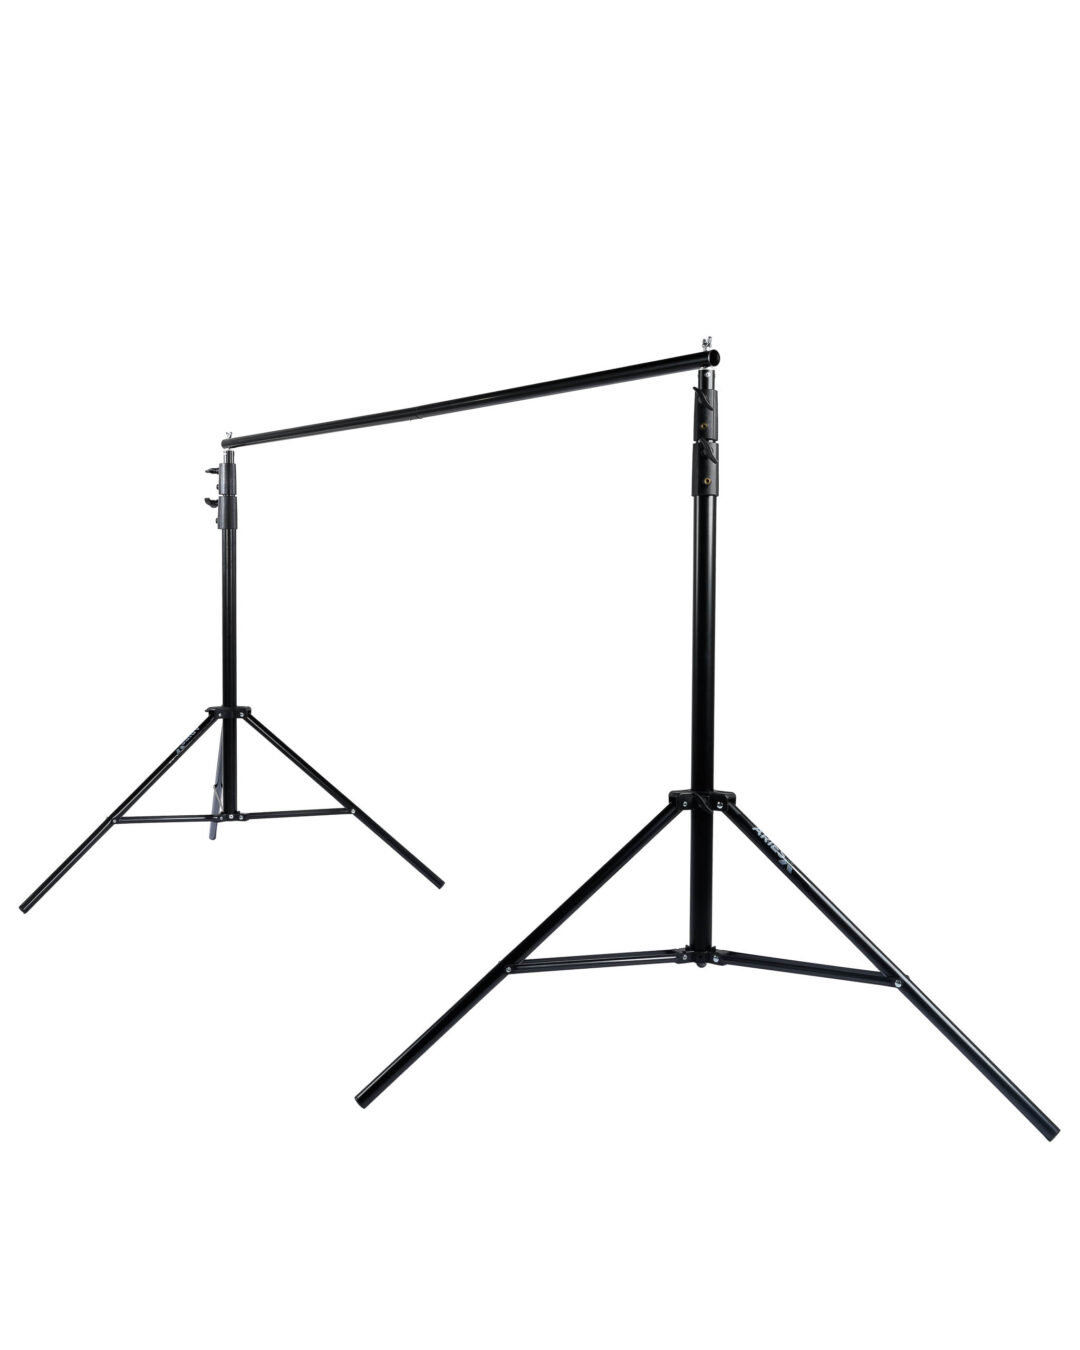 AX-WU-BSA-1109 AriesX StarX Backdrop Stand for Photography (1)